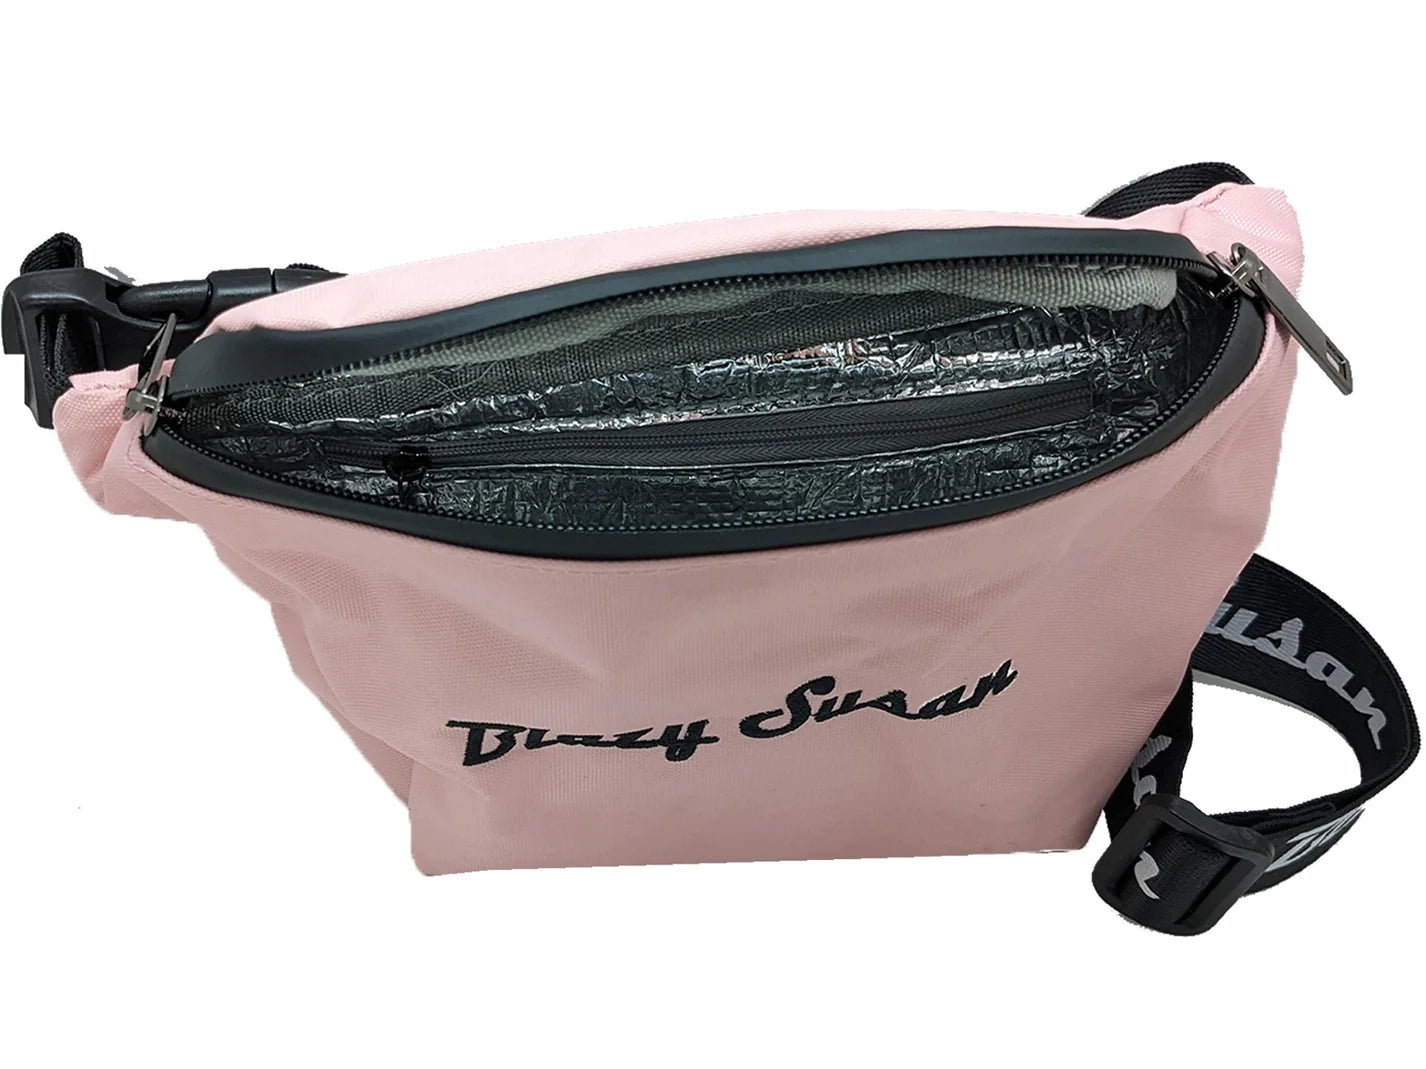 Blazy Susan - Hip Pack, Smell Proof